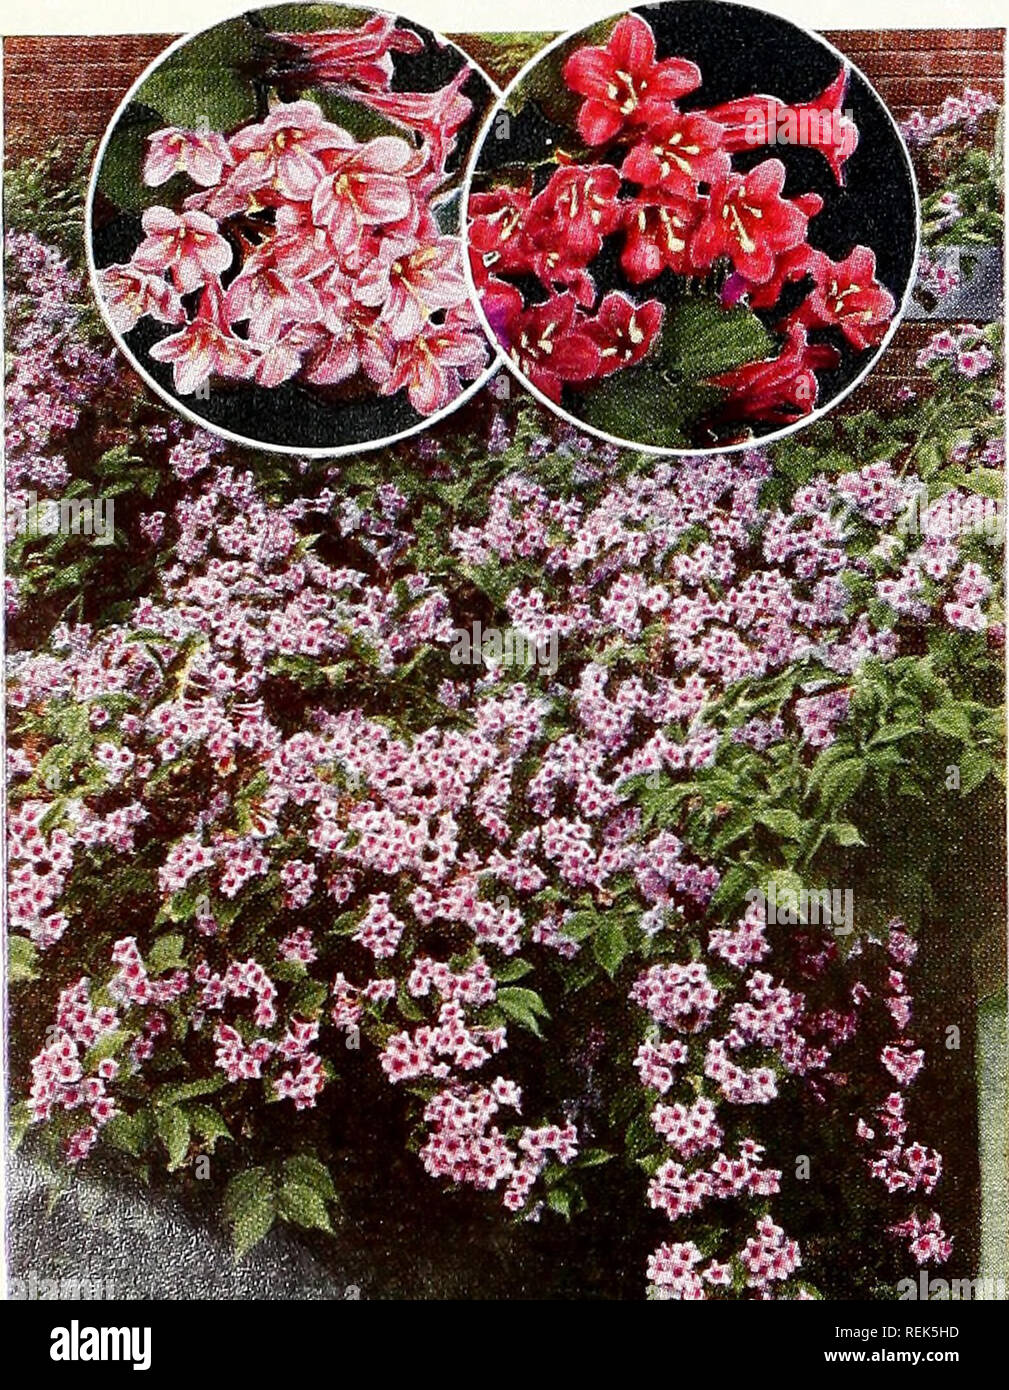 . C. M. Hobbs &amp; Sons. Nurseries Horticulture Catalogs; Evergreens Catalogs; Fruit trees Catalogs; Climbing plants Catalogs; Shrubs Catalogs; Vegetables Catalogs. Ribes Alpinum RHUS - Sumac Often seen along roadsides in the country and noted most in the fall when the foliage has colored. More noticeable in a mass planting. RHUS canadensis (Fragrant Sumac). 4 to 6 ft. A medium growing shrub of spreading branches with spikes of yellow flowers in the early spring and red fruits appearing later. Foliage when bruised emits an aromatic odor. Good for planting on hot dry slopes. R. copallina (Flam Stock Photo